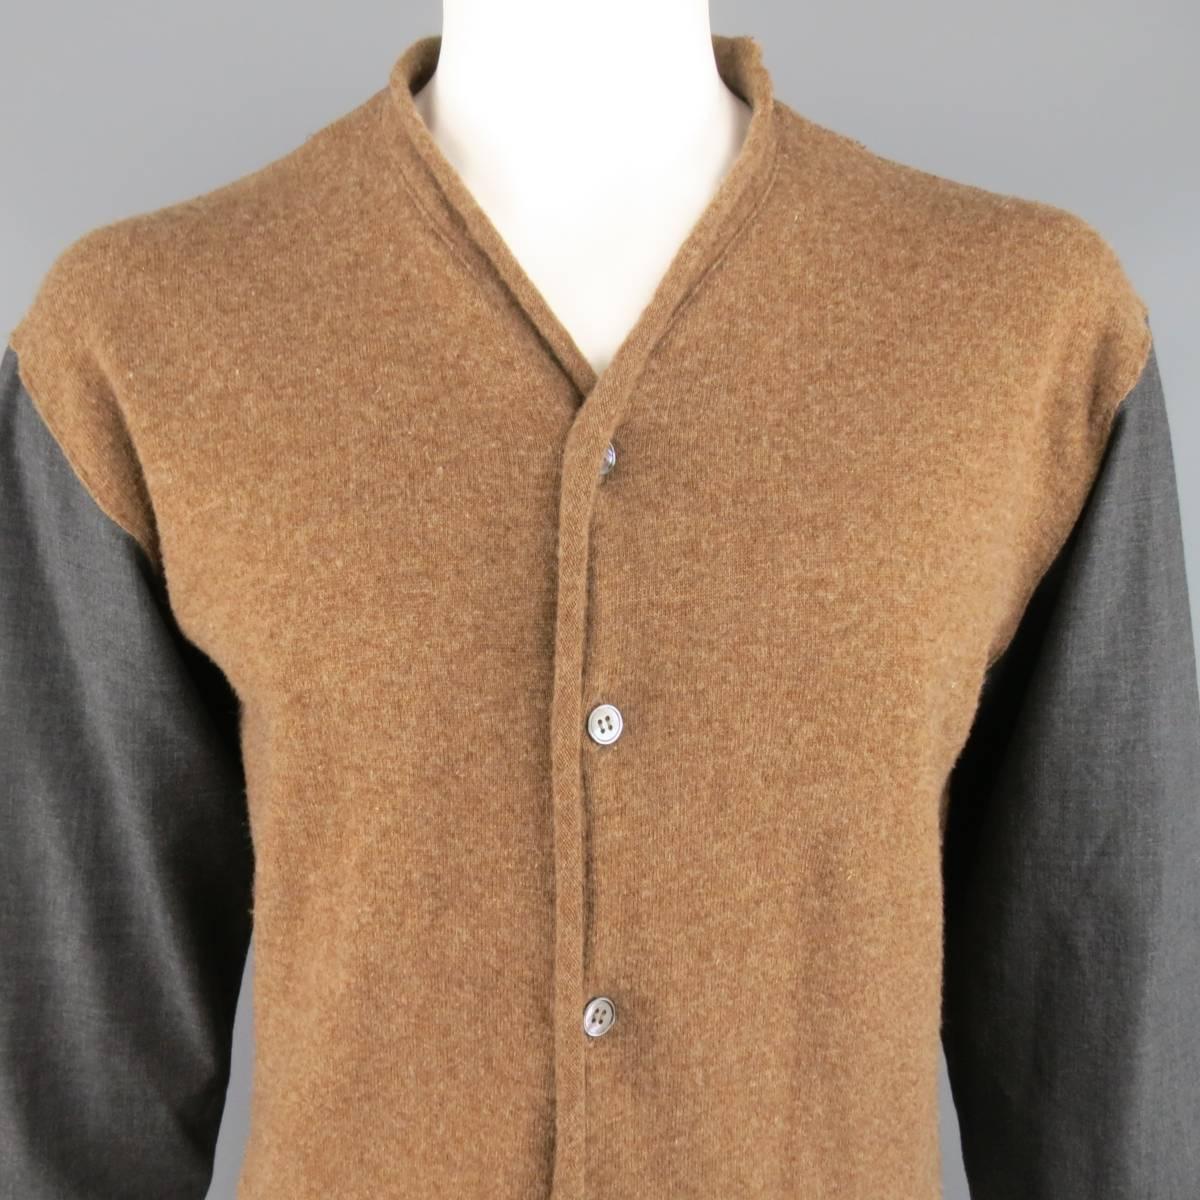 Vintage COMME des GARCONS cardigan shirt features a light brown knit body with rolled hem and charcoal dress shirt sleeves. Small holes and wear throughout. As-Is. Made in France.
 
Fair Pre-Owned Condition.
Marked: L
 
Measurements:
 
Shoulder: 23